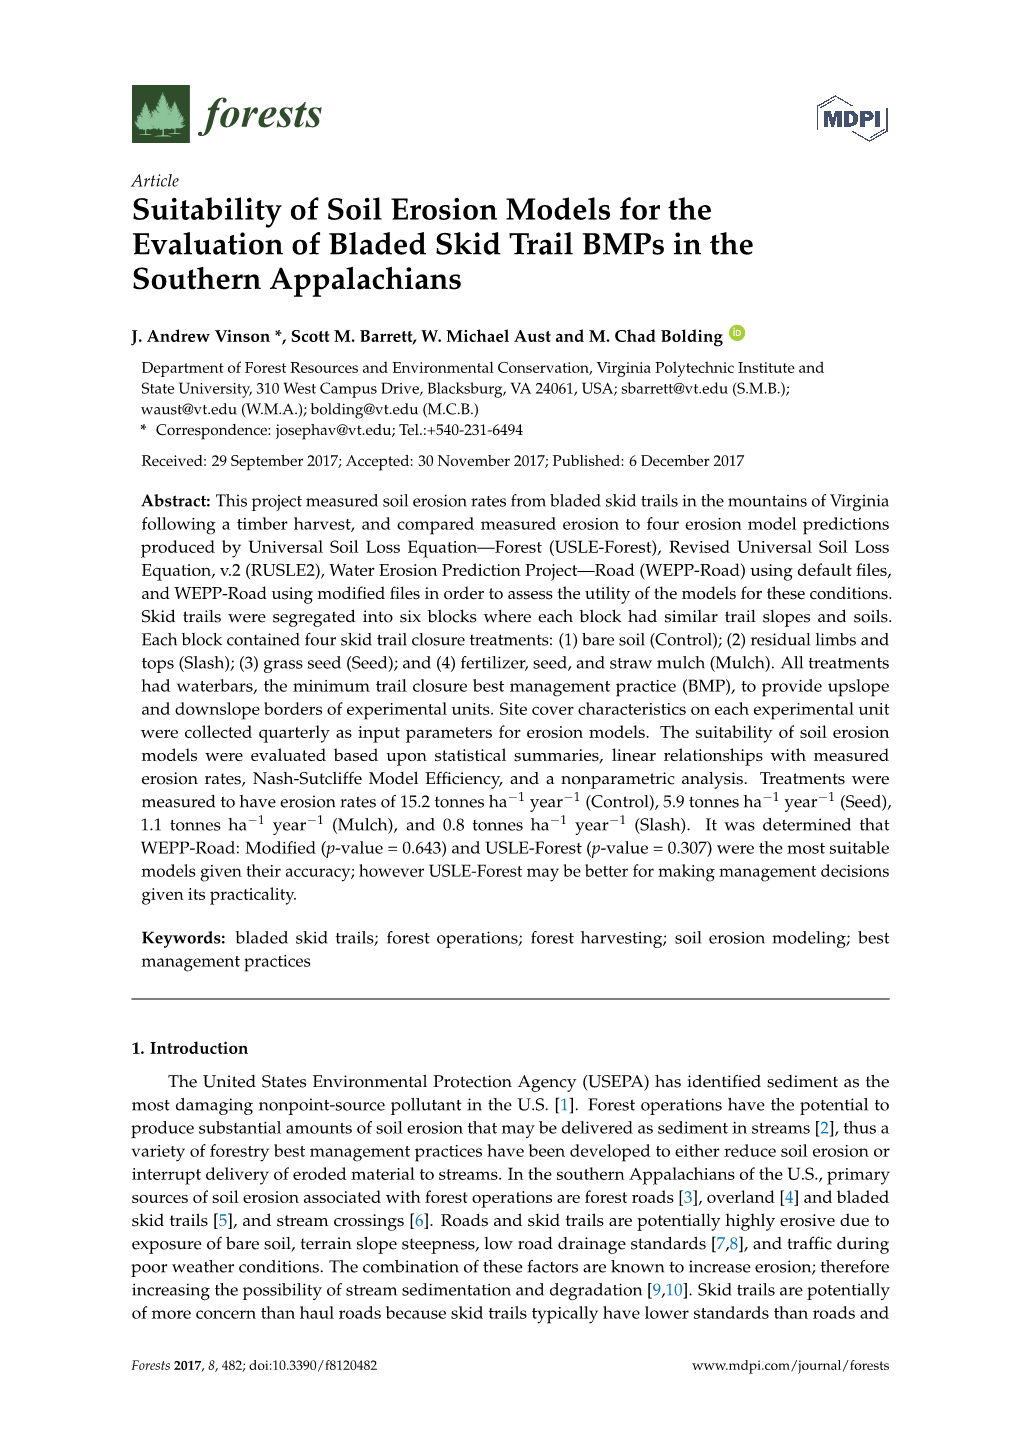 Suitability of Soil Erosion Models for the Evaluation of Bladed Skid Trail Bmps in the Southern Appalachians